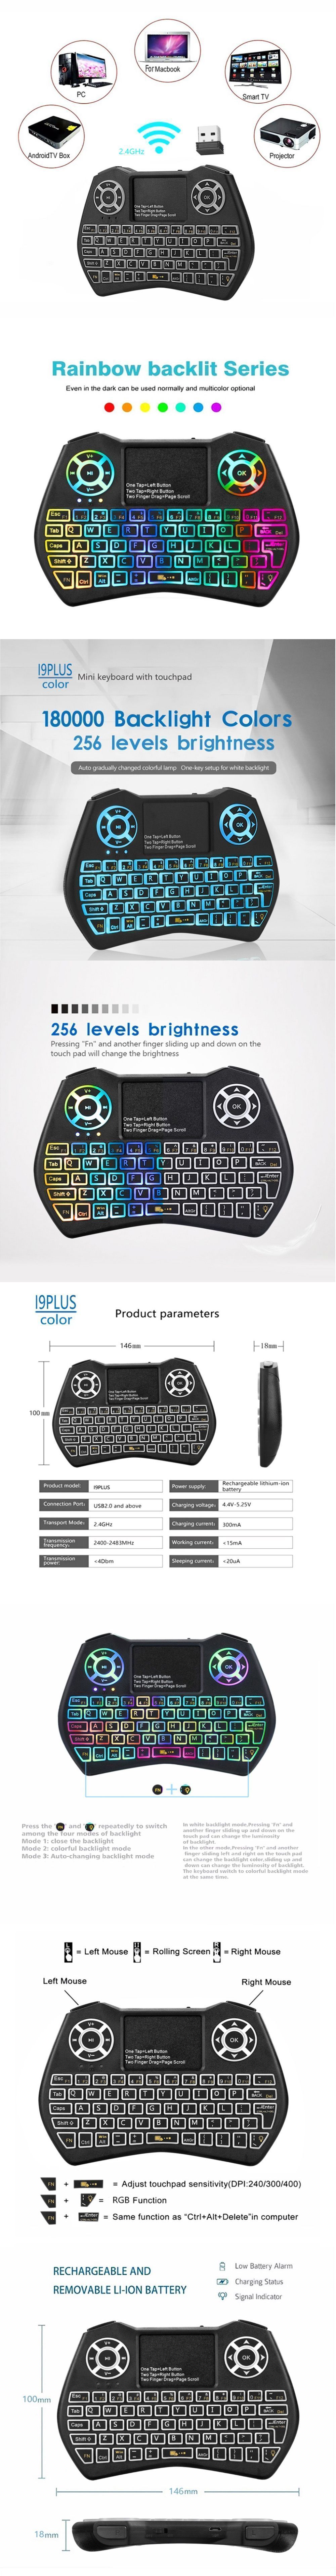 I9-Plus-Mini-24GHz-Keyboard-Colorful-Backlight-Fly-Air-Mouse-Wireless-Keyboard-With-Touchpad-Remote--1430852